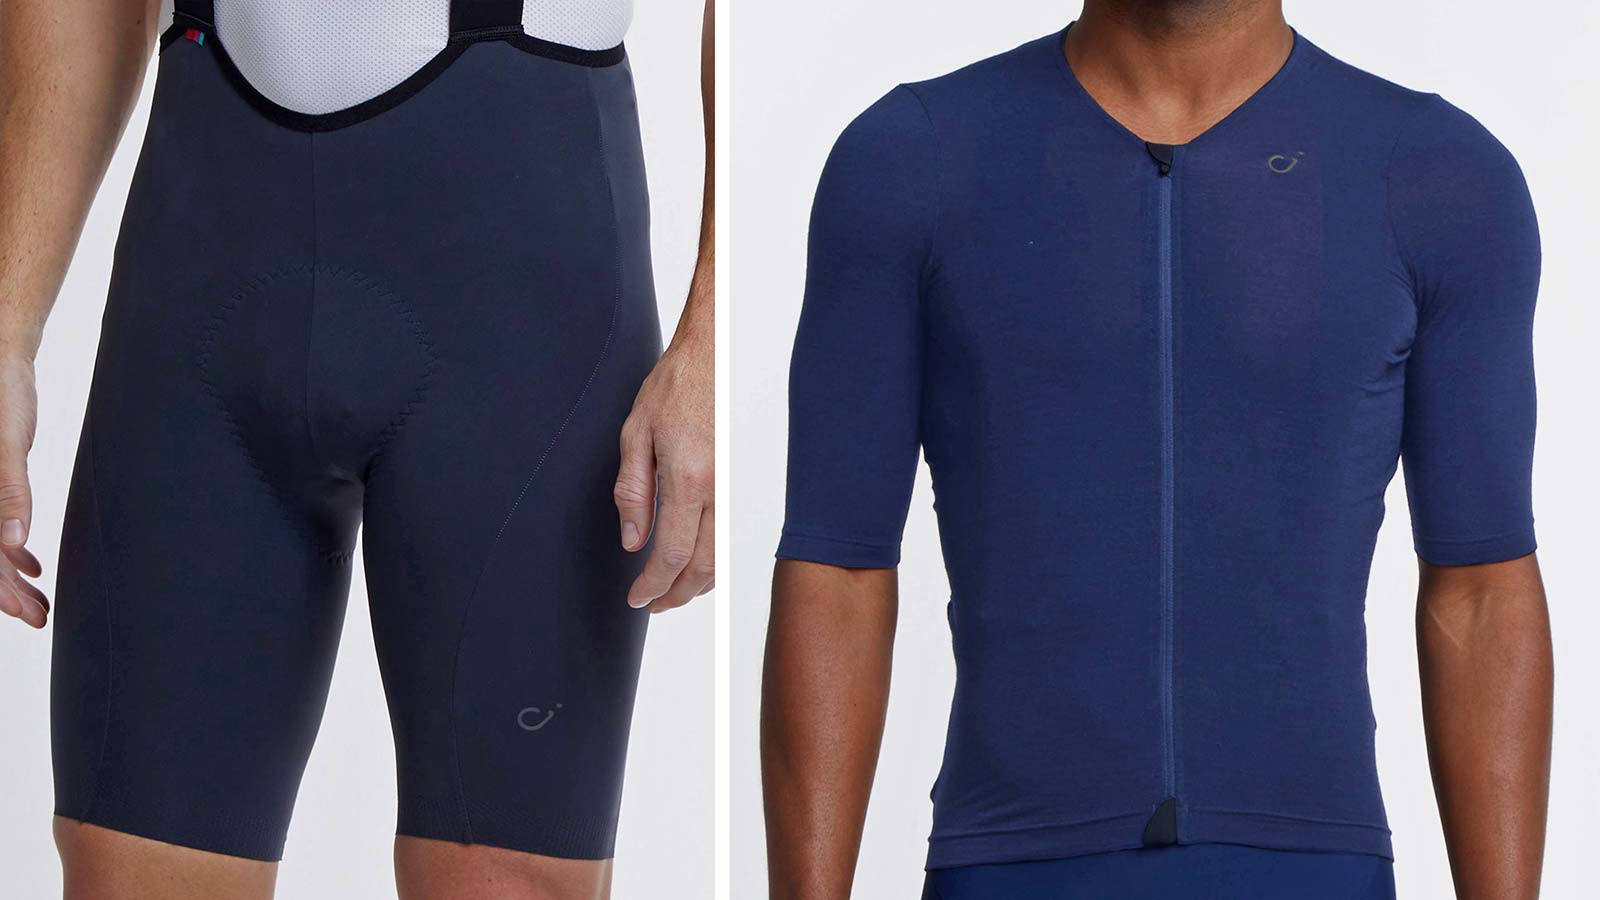 Velocio's new Luxe & Concept spring cycling kit, Luxe Bib Shorts & Concept Merino Jersey